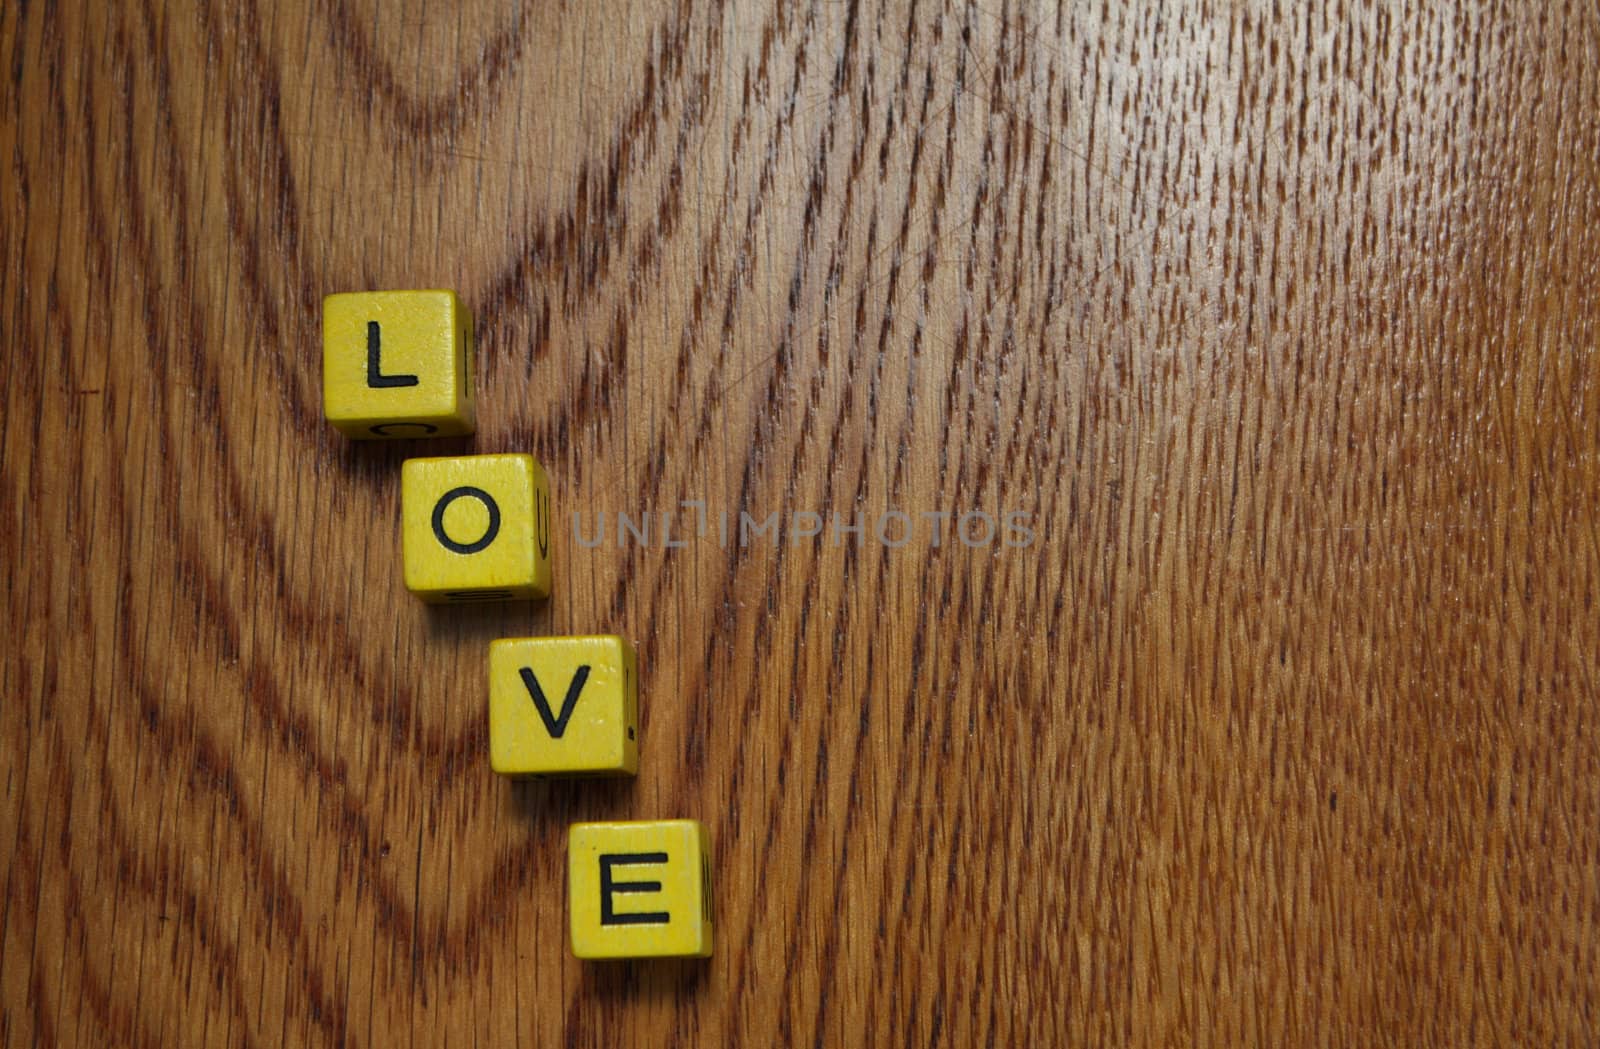 Four blocks on a wooden surface spelling love